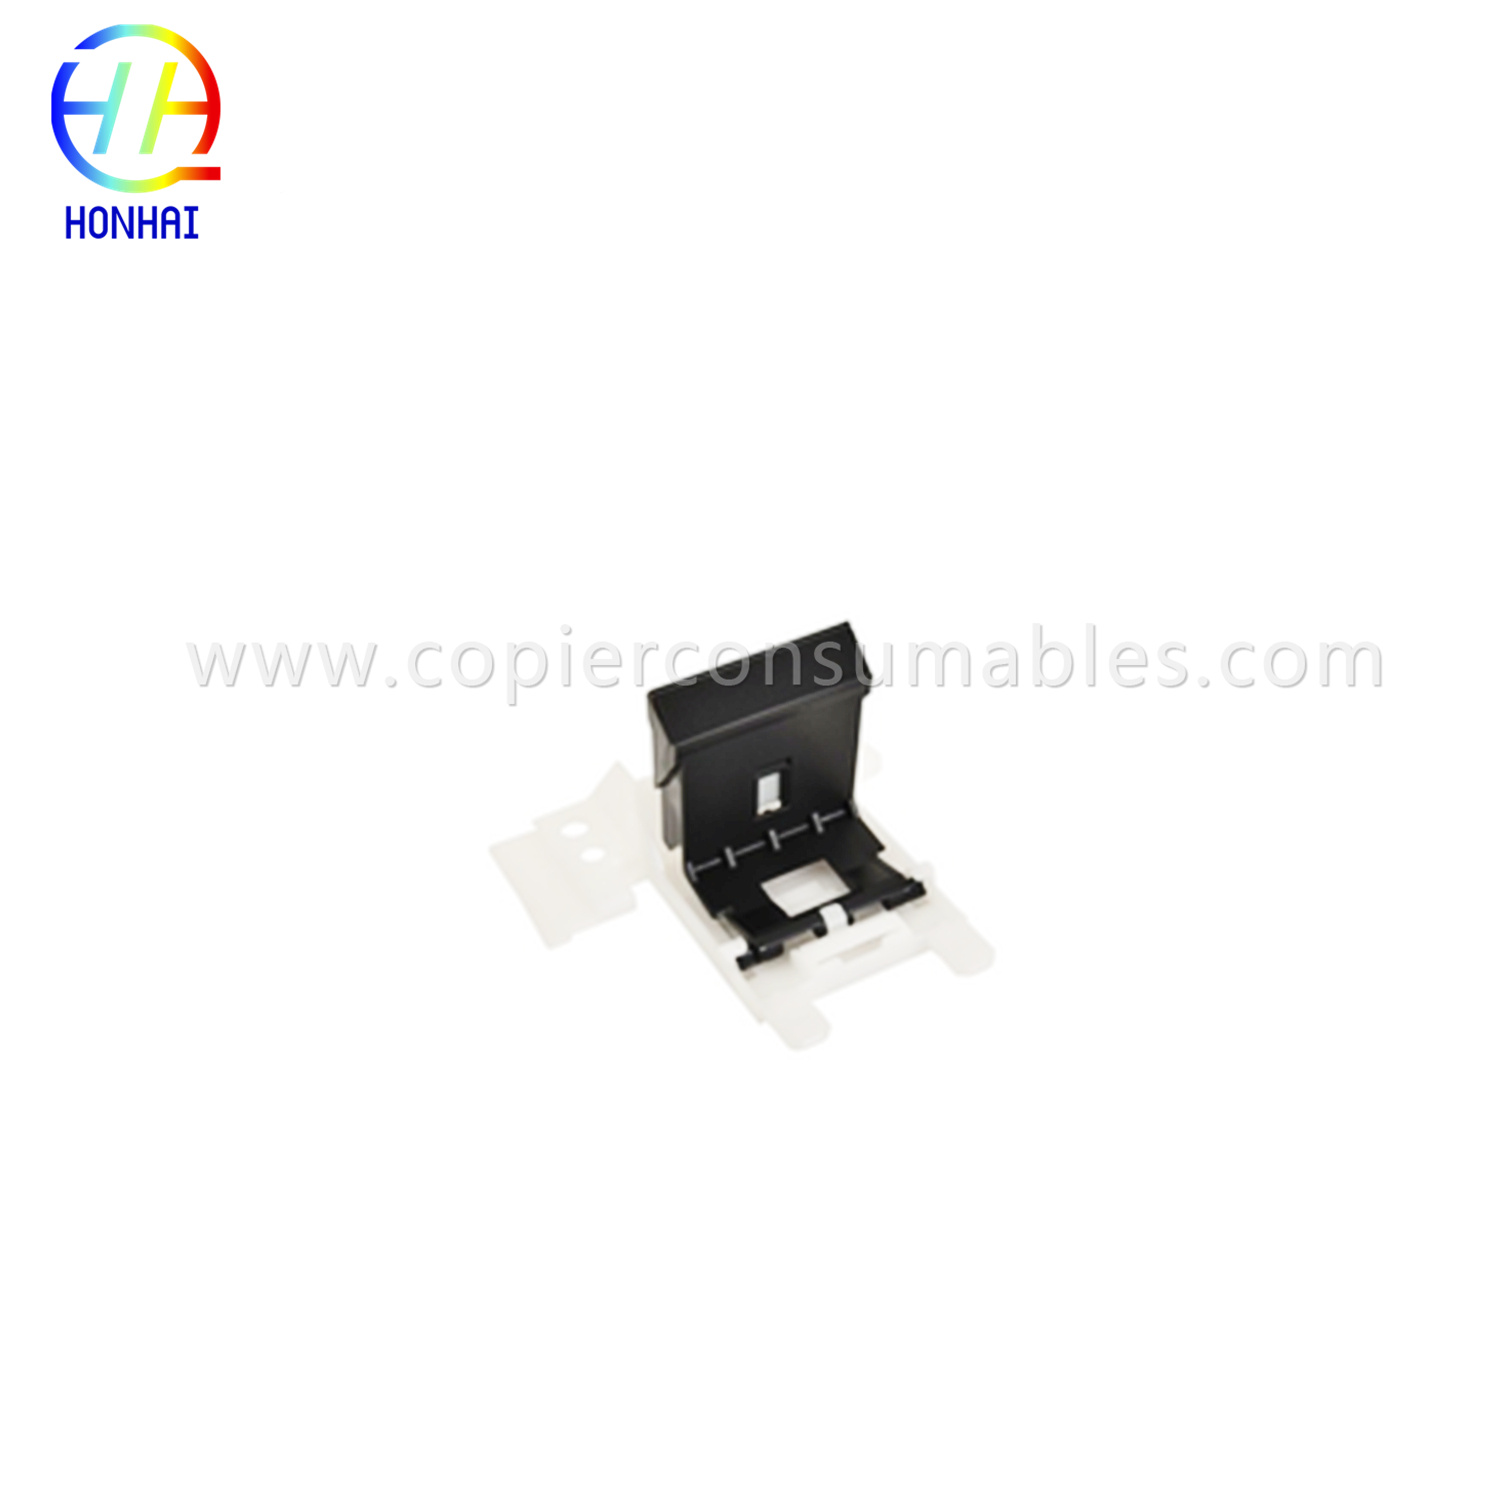 Separation Pad for HP M203